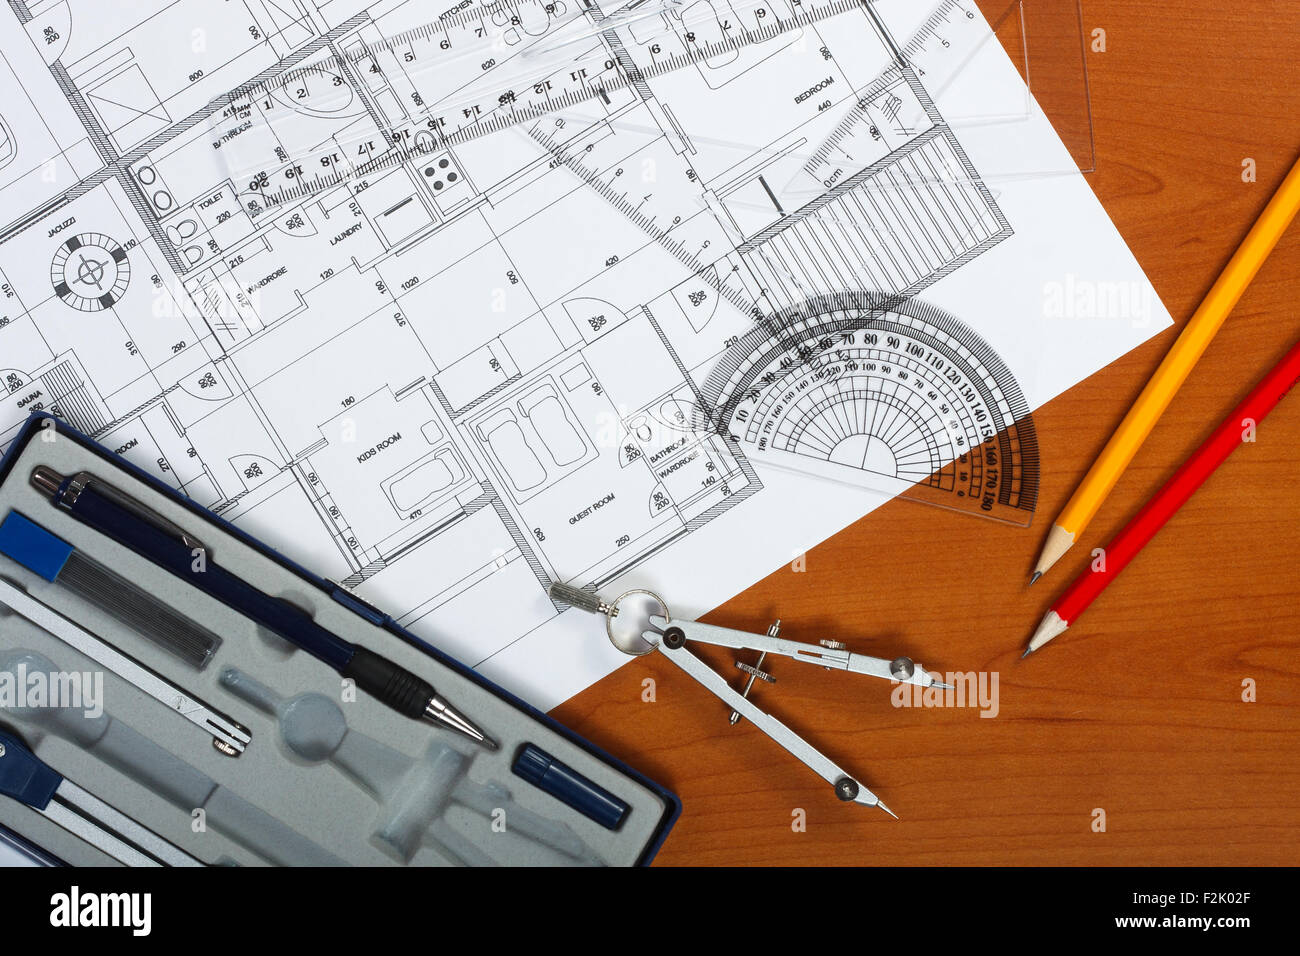 Architectural plans, pencils and ruler on the desk Stock Photo